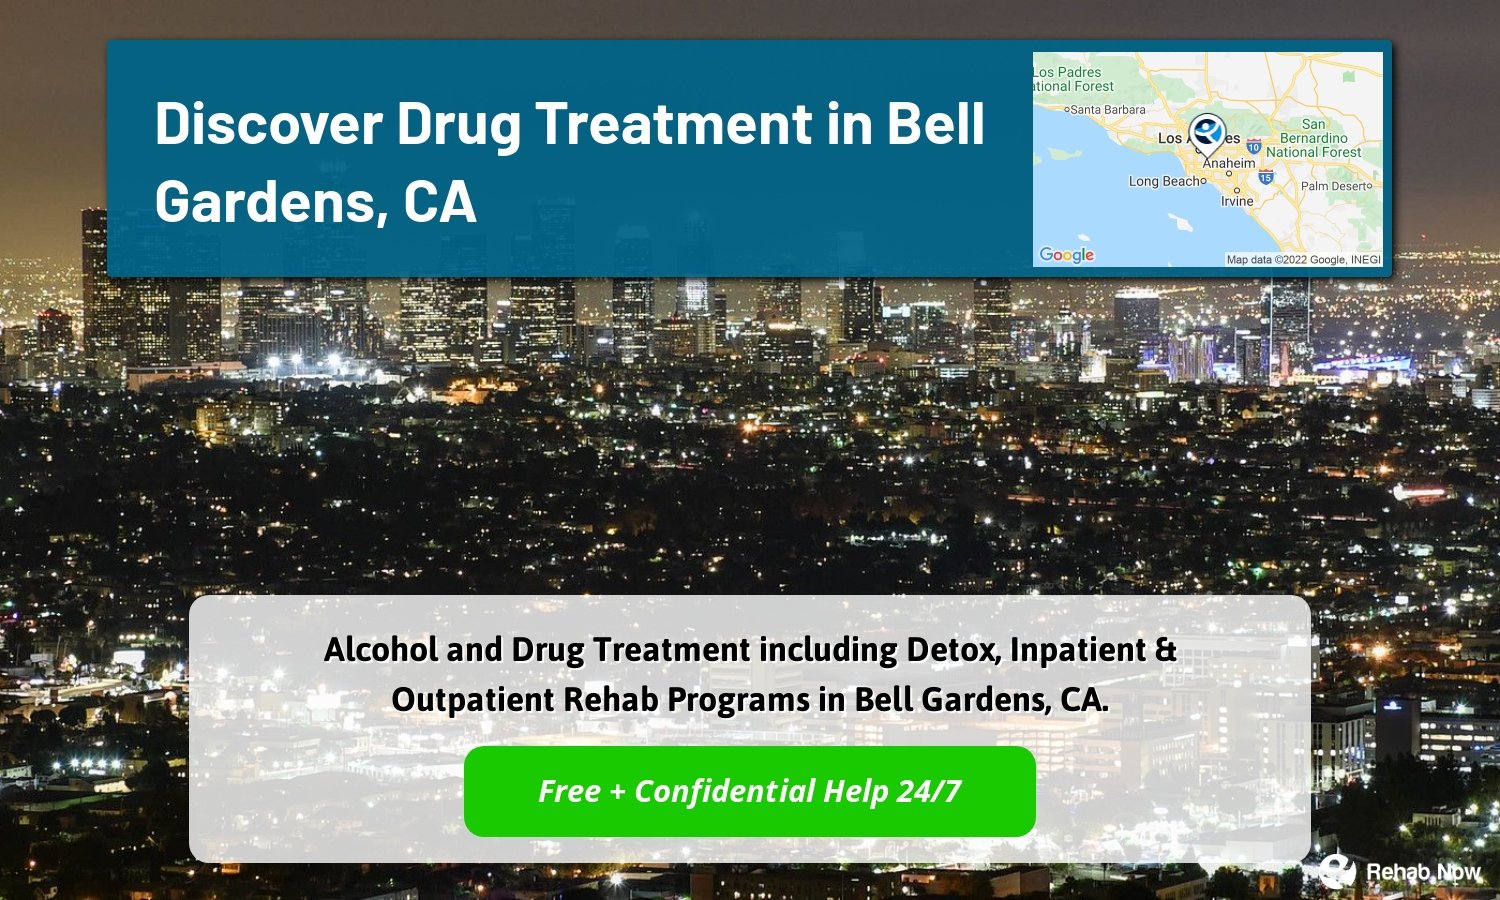 Alcohol and Drug Treatment including Detox, Inpatient & Outpatient Rehab Programs in Bell Gardens, CA.